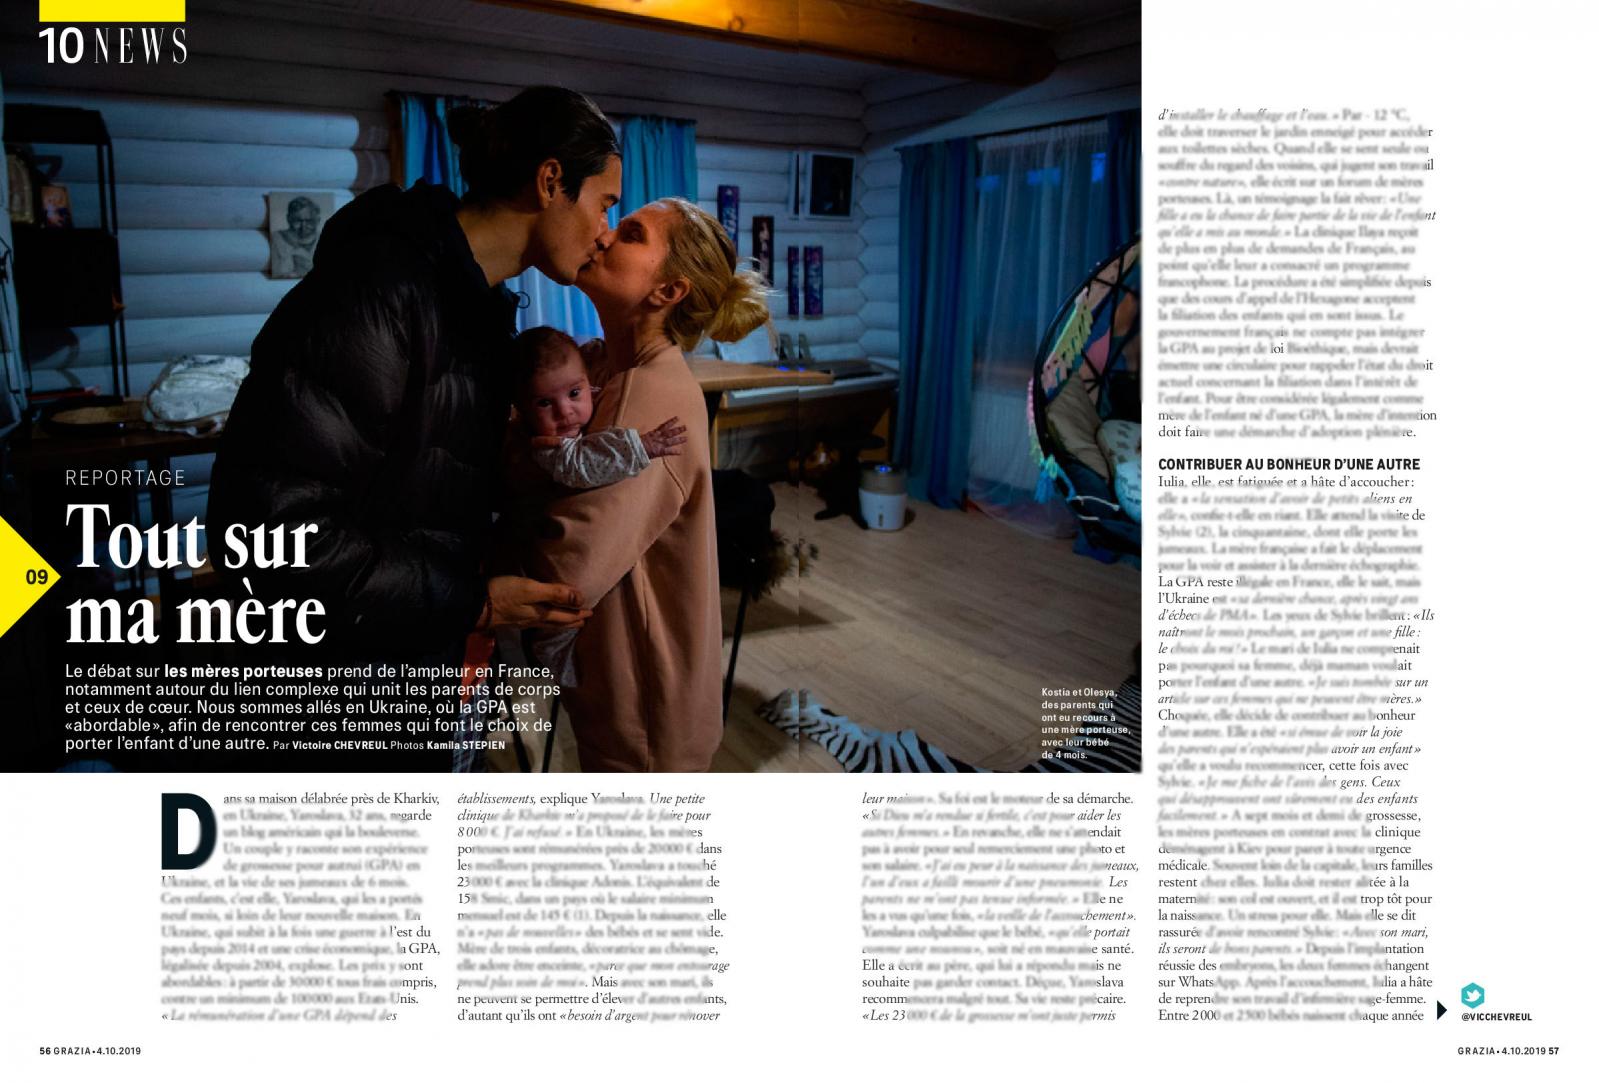 All about my mother (Surrogacy: Grazia mag)